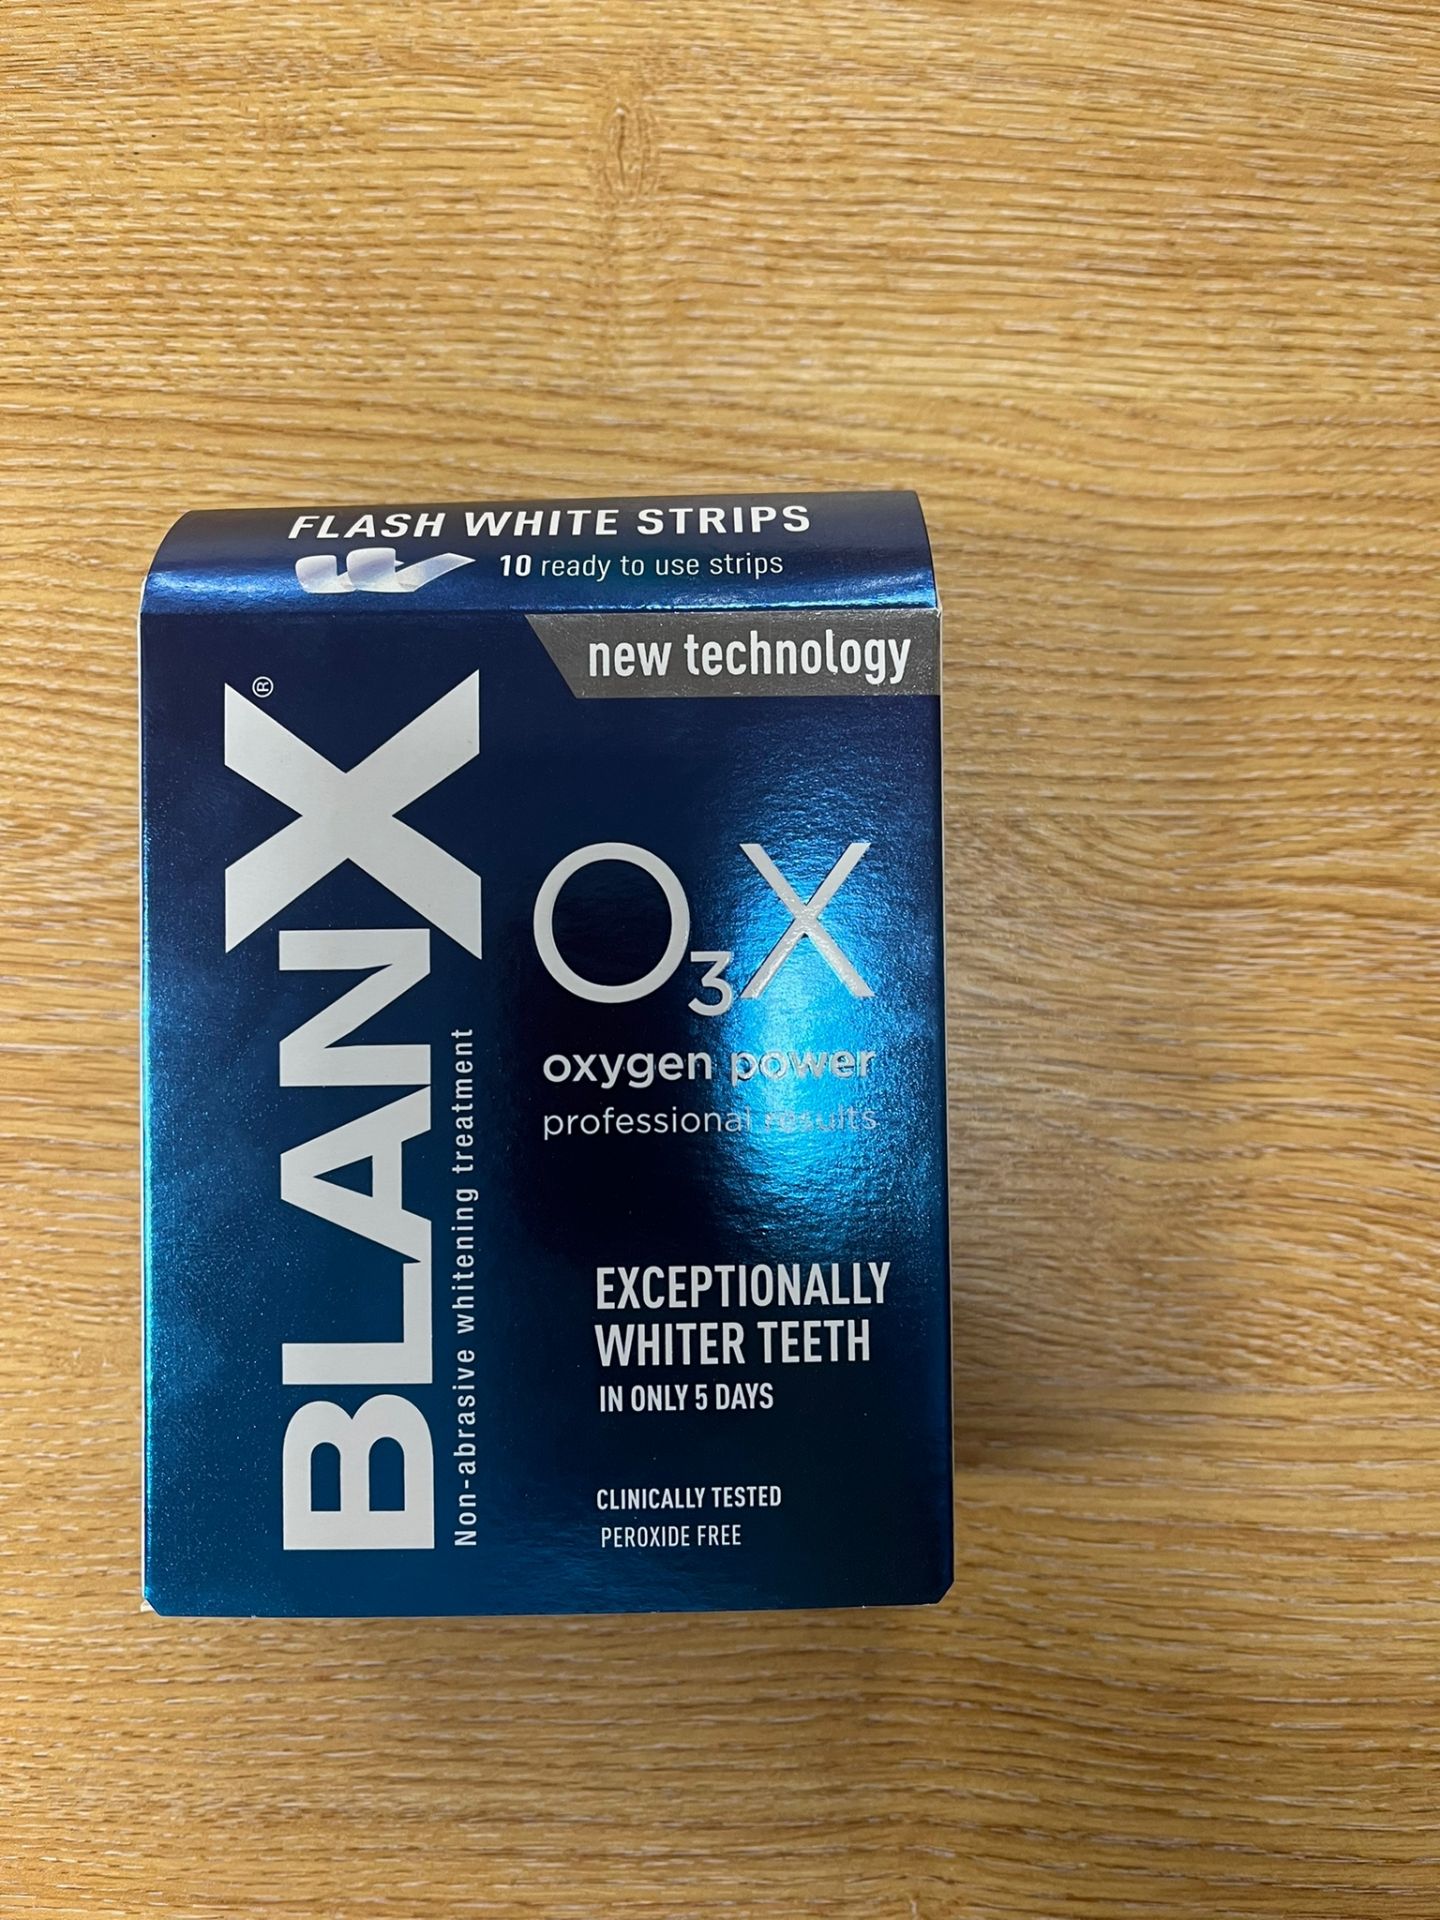 Lot of Blanx Teeth Care Products Intensive White Treatment, Whitening Strips & Whitening Gums - Image 4 of 4